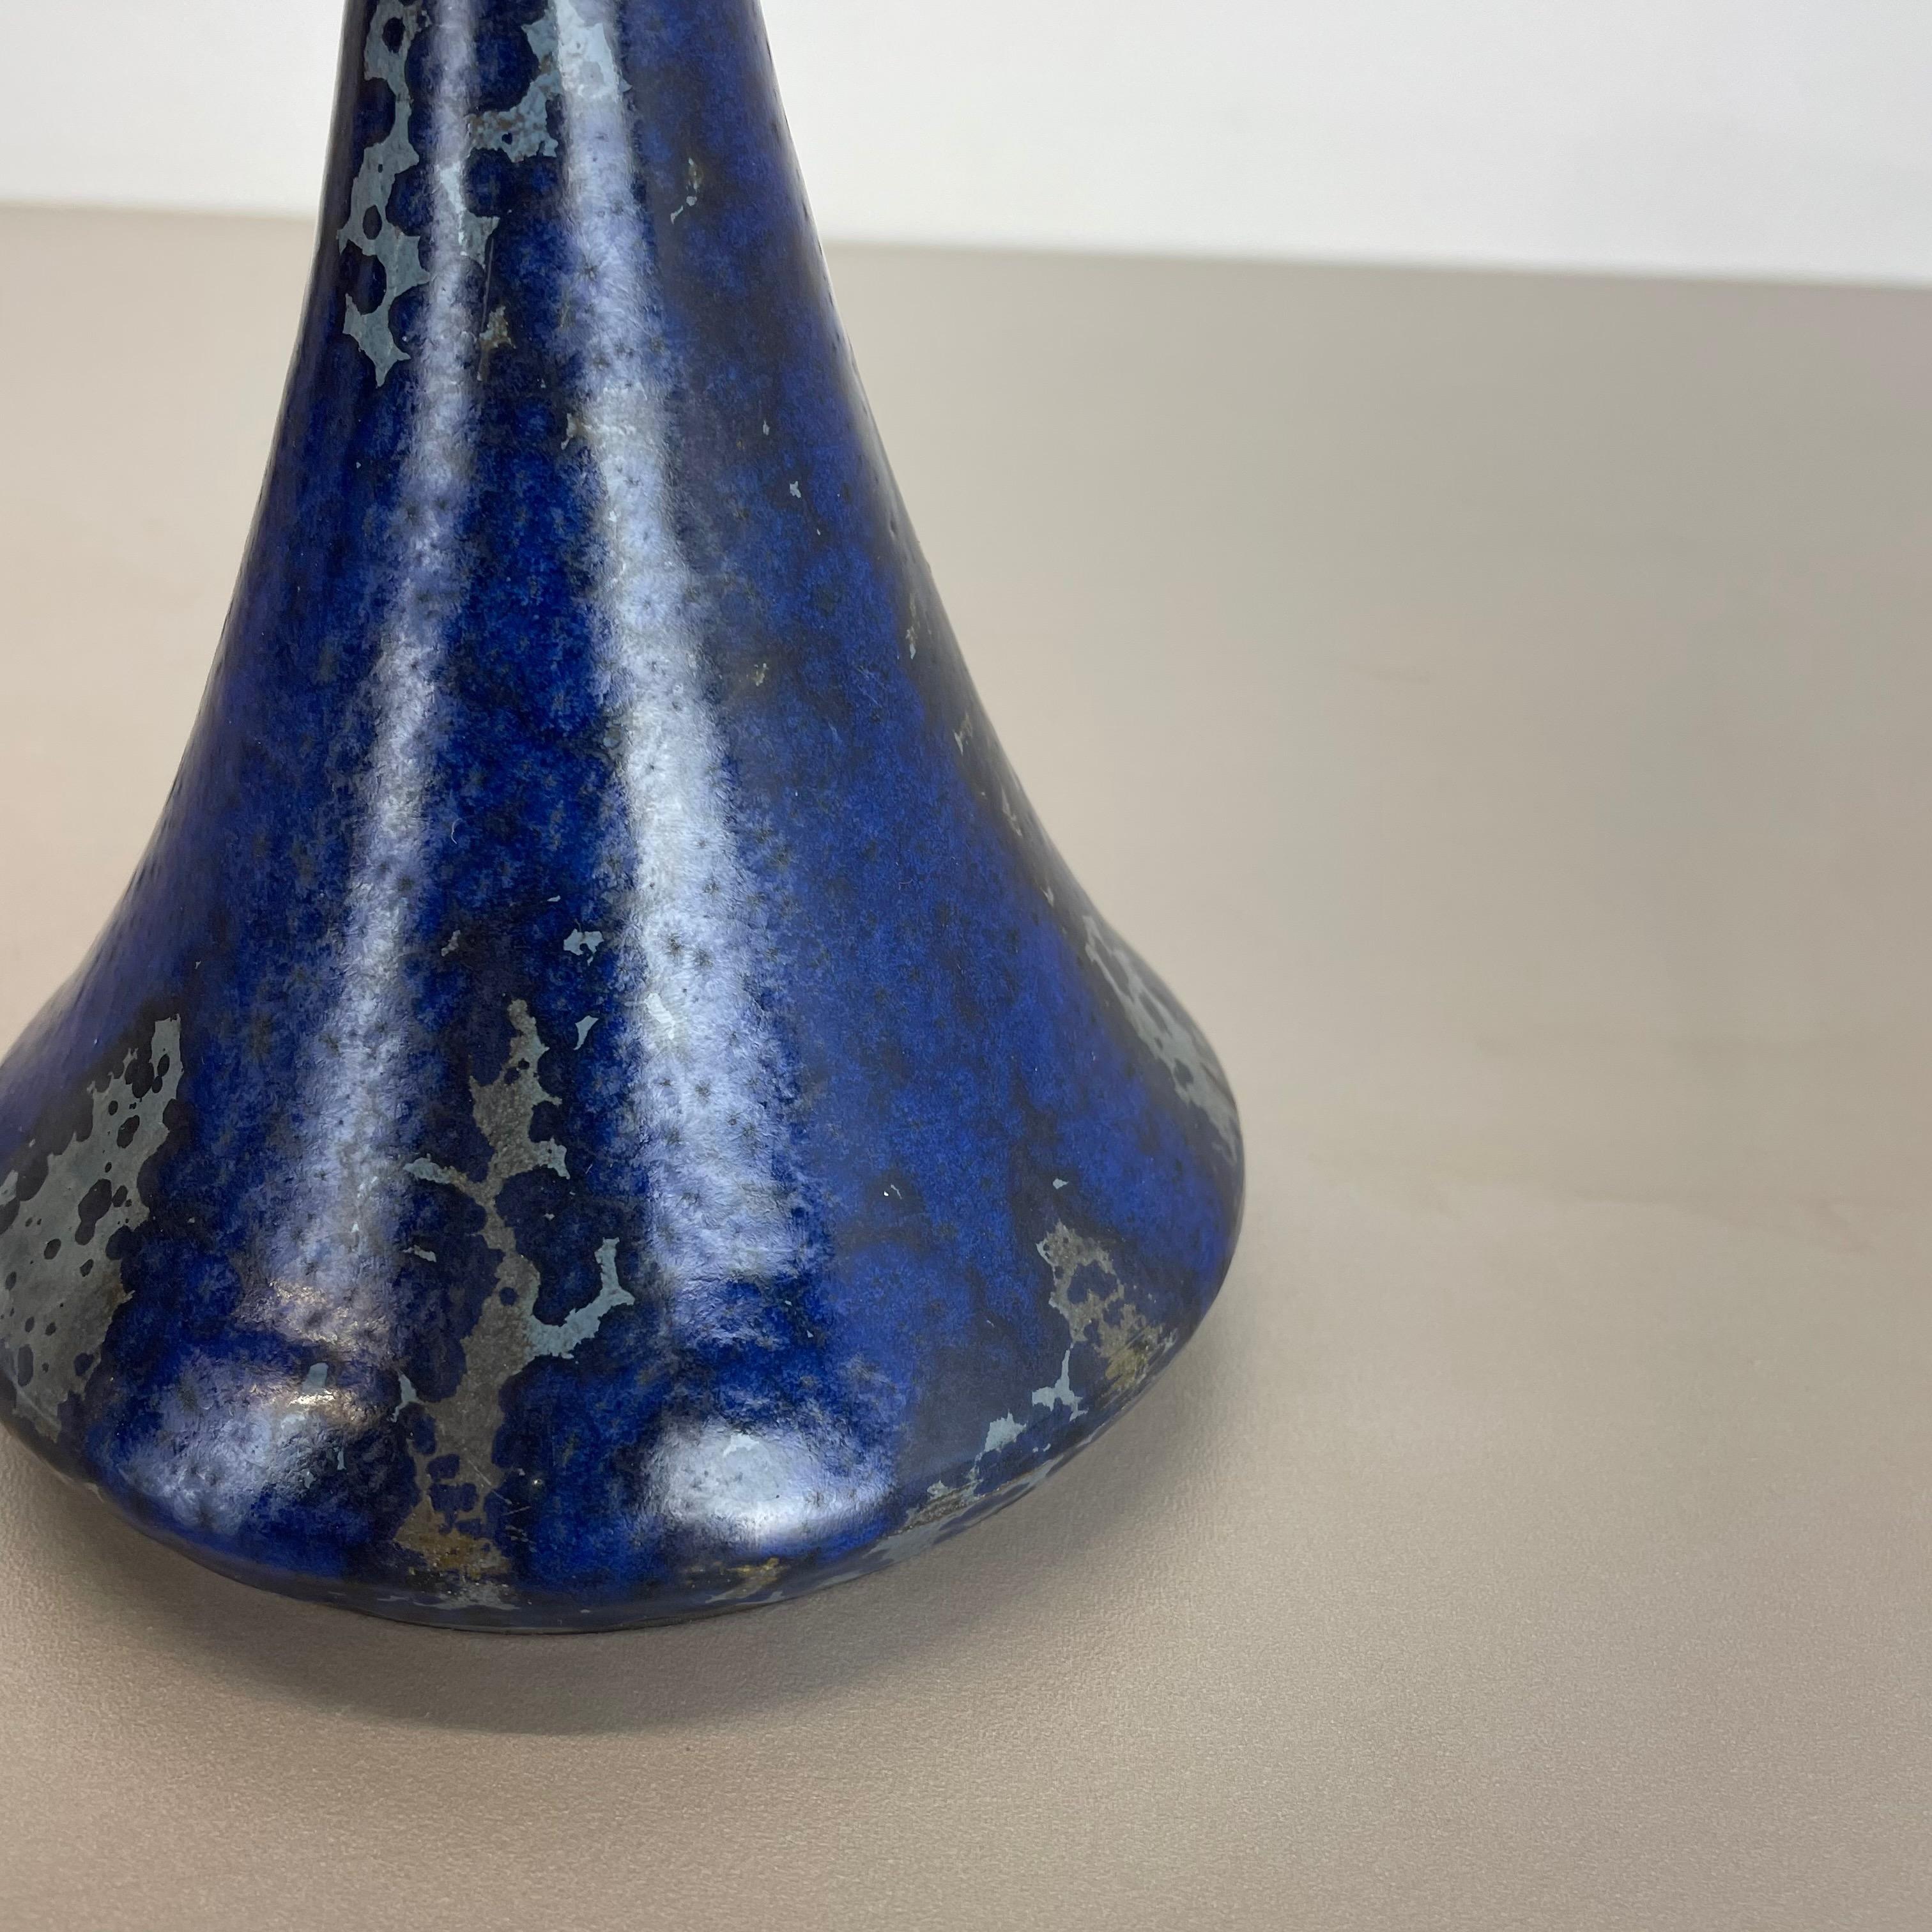 Abstract Ceramic Studio Pottery Vase by Gerhard Liebenthron, Germany, 1960s For Sale 2